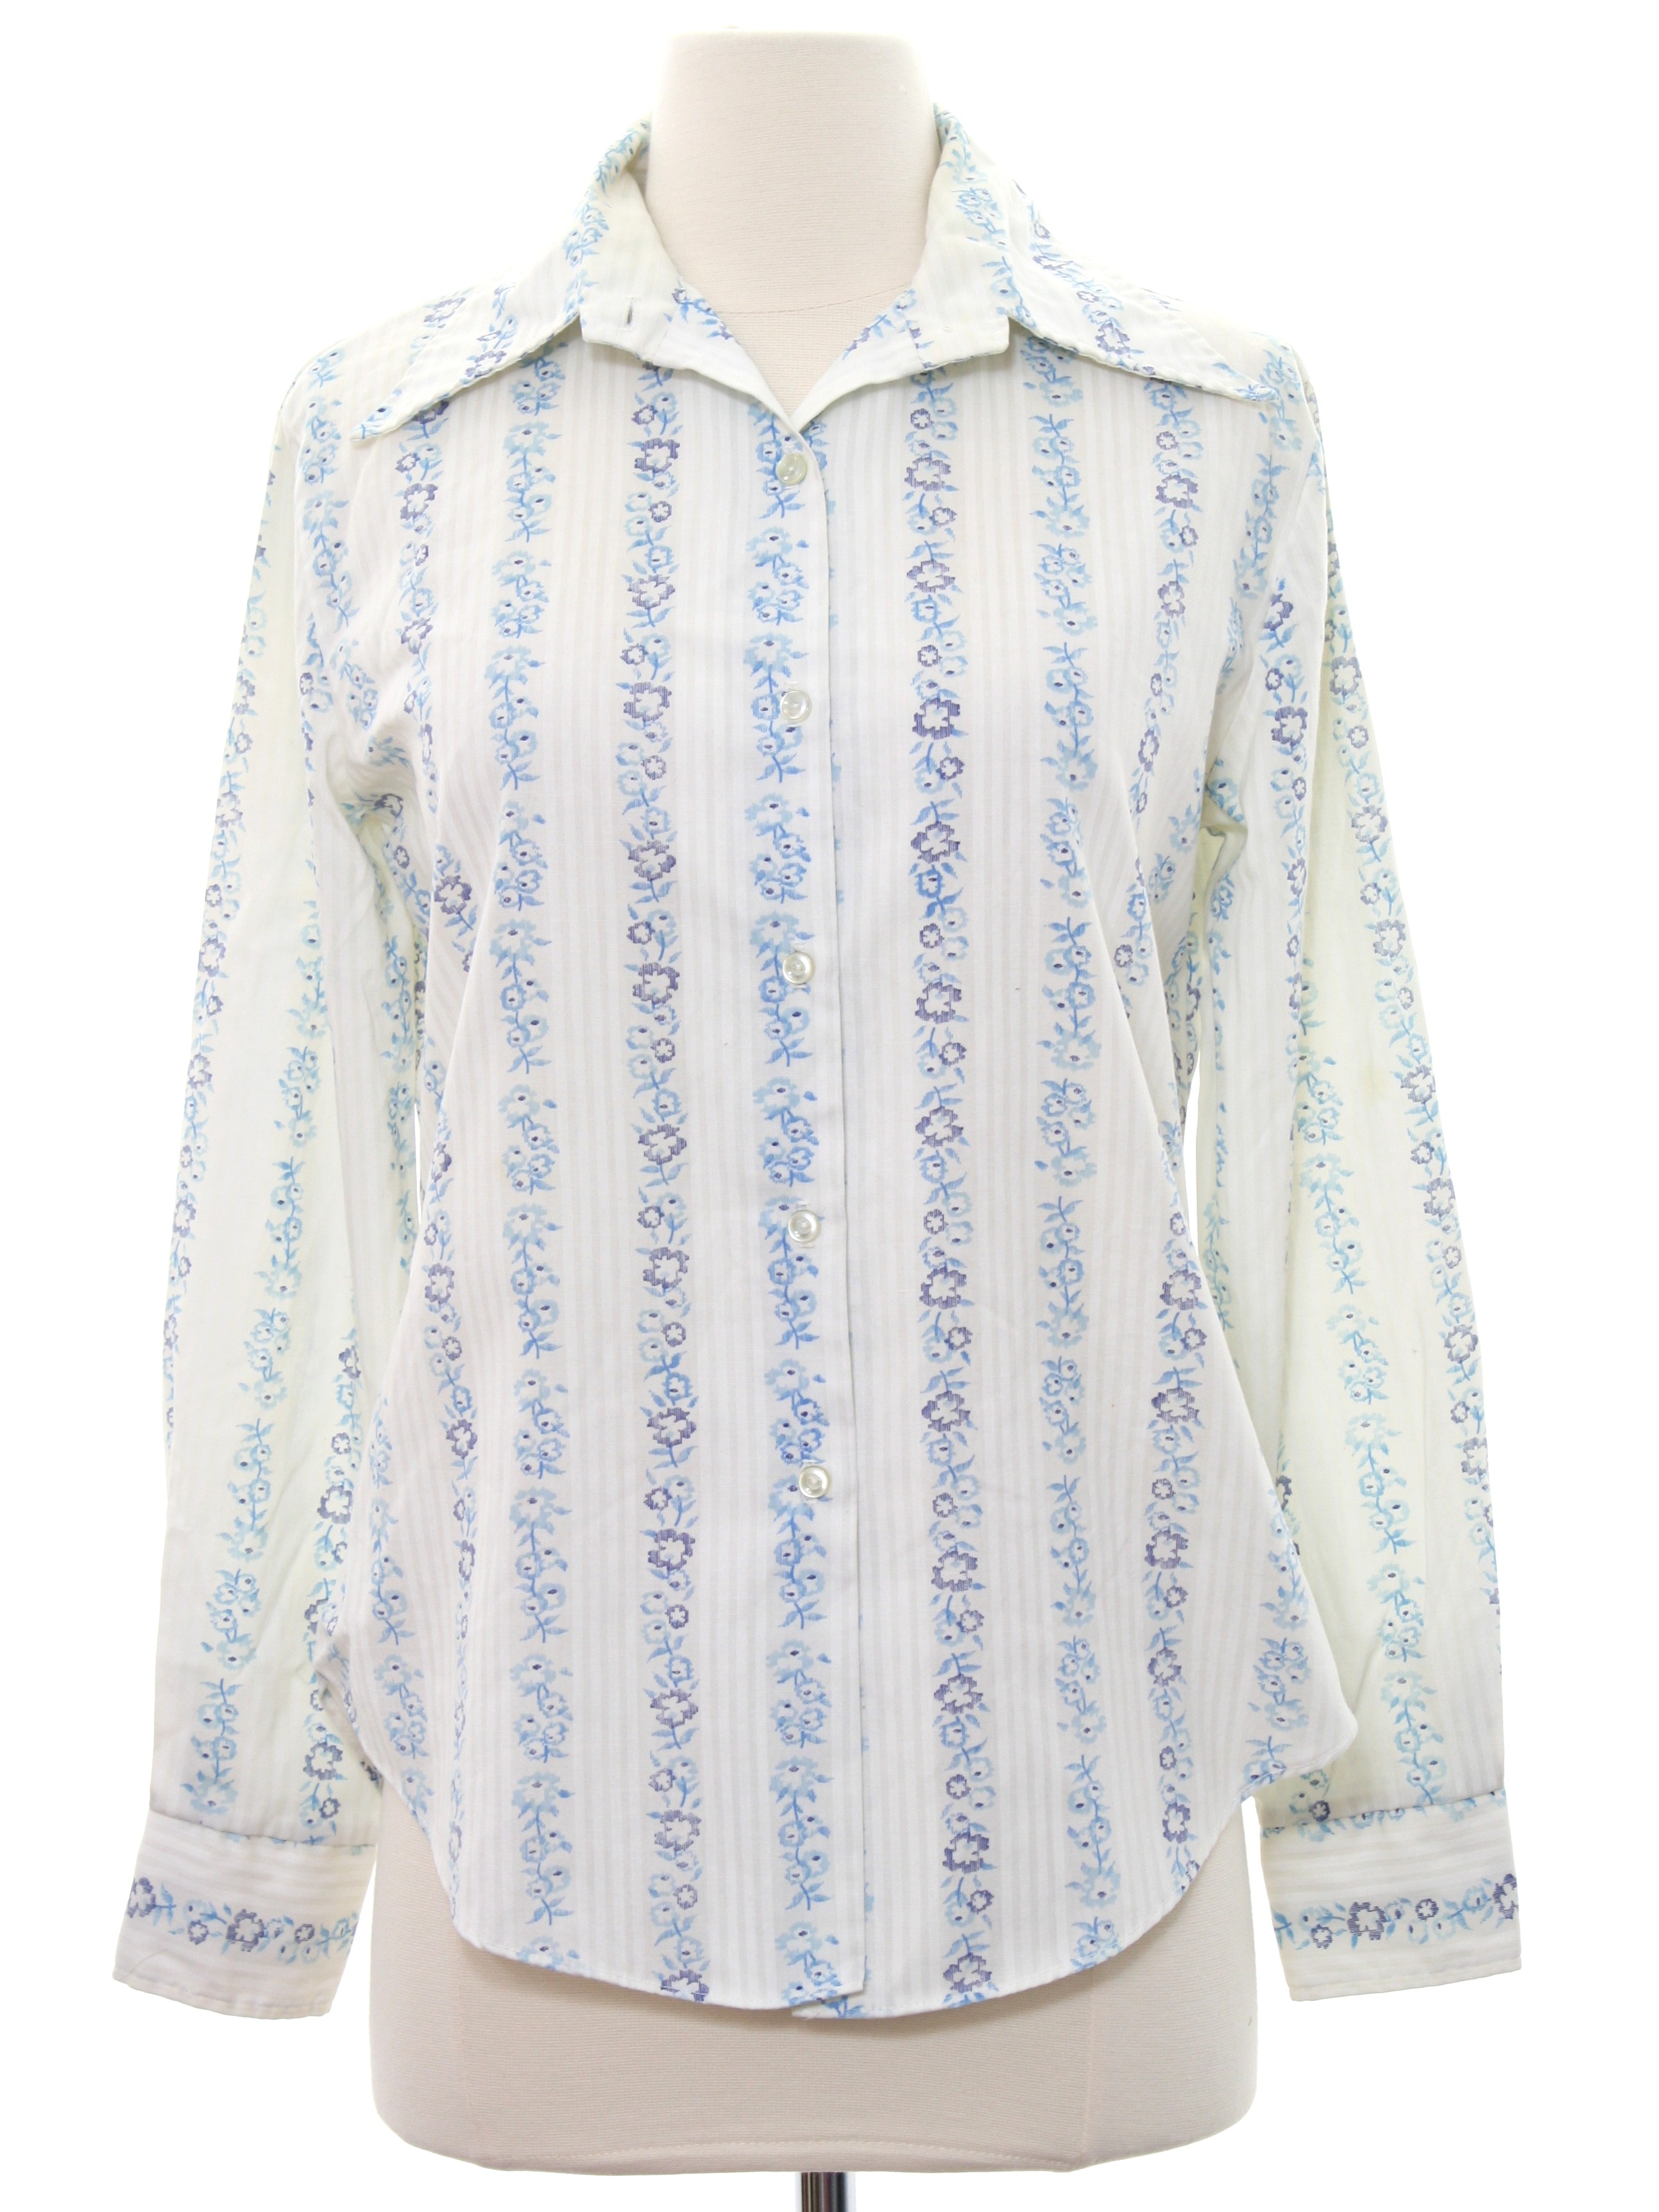 Vintage Shirt Accents 1970s Shirt: 70s -Shirt Accents- Womens white and ...